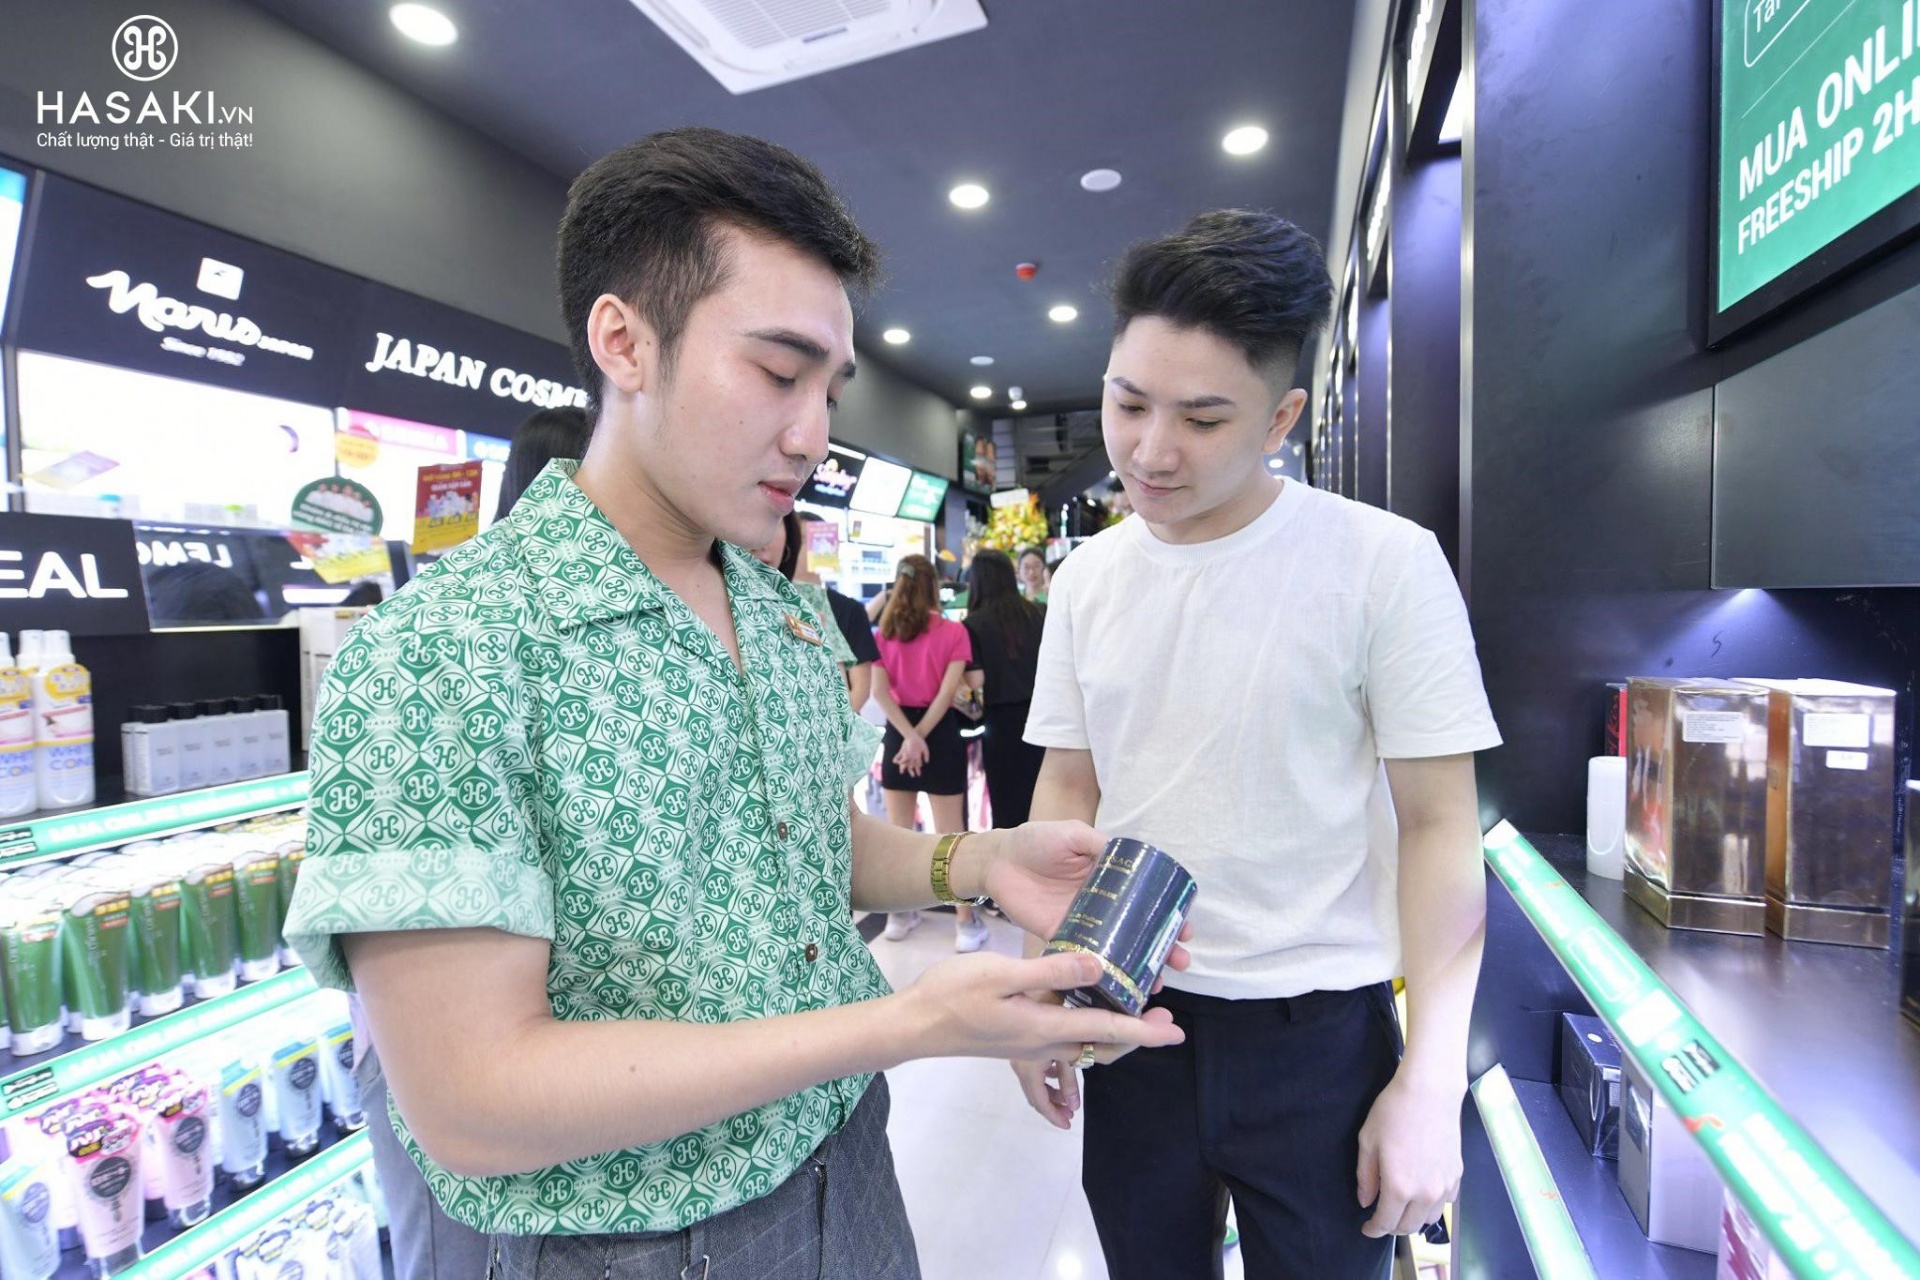 Alibaba strengthens presence in Vietnam with stake in beauty chain Hasaki